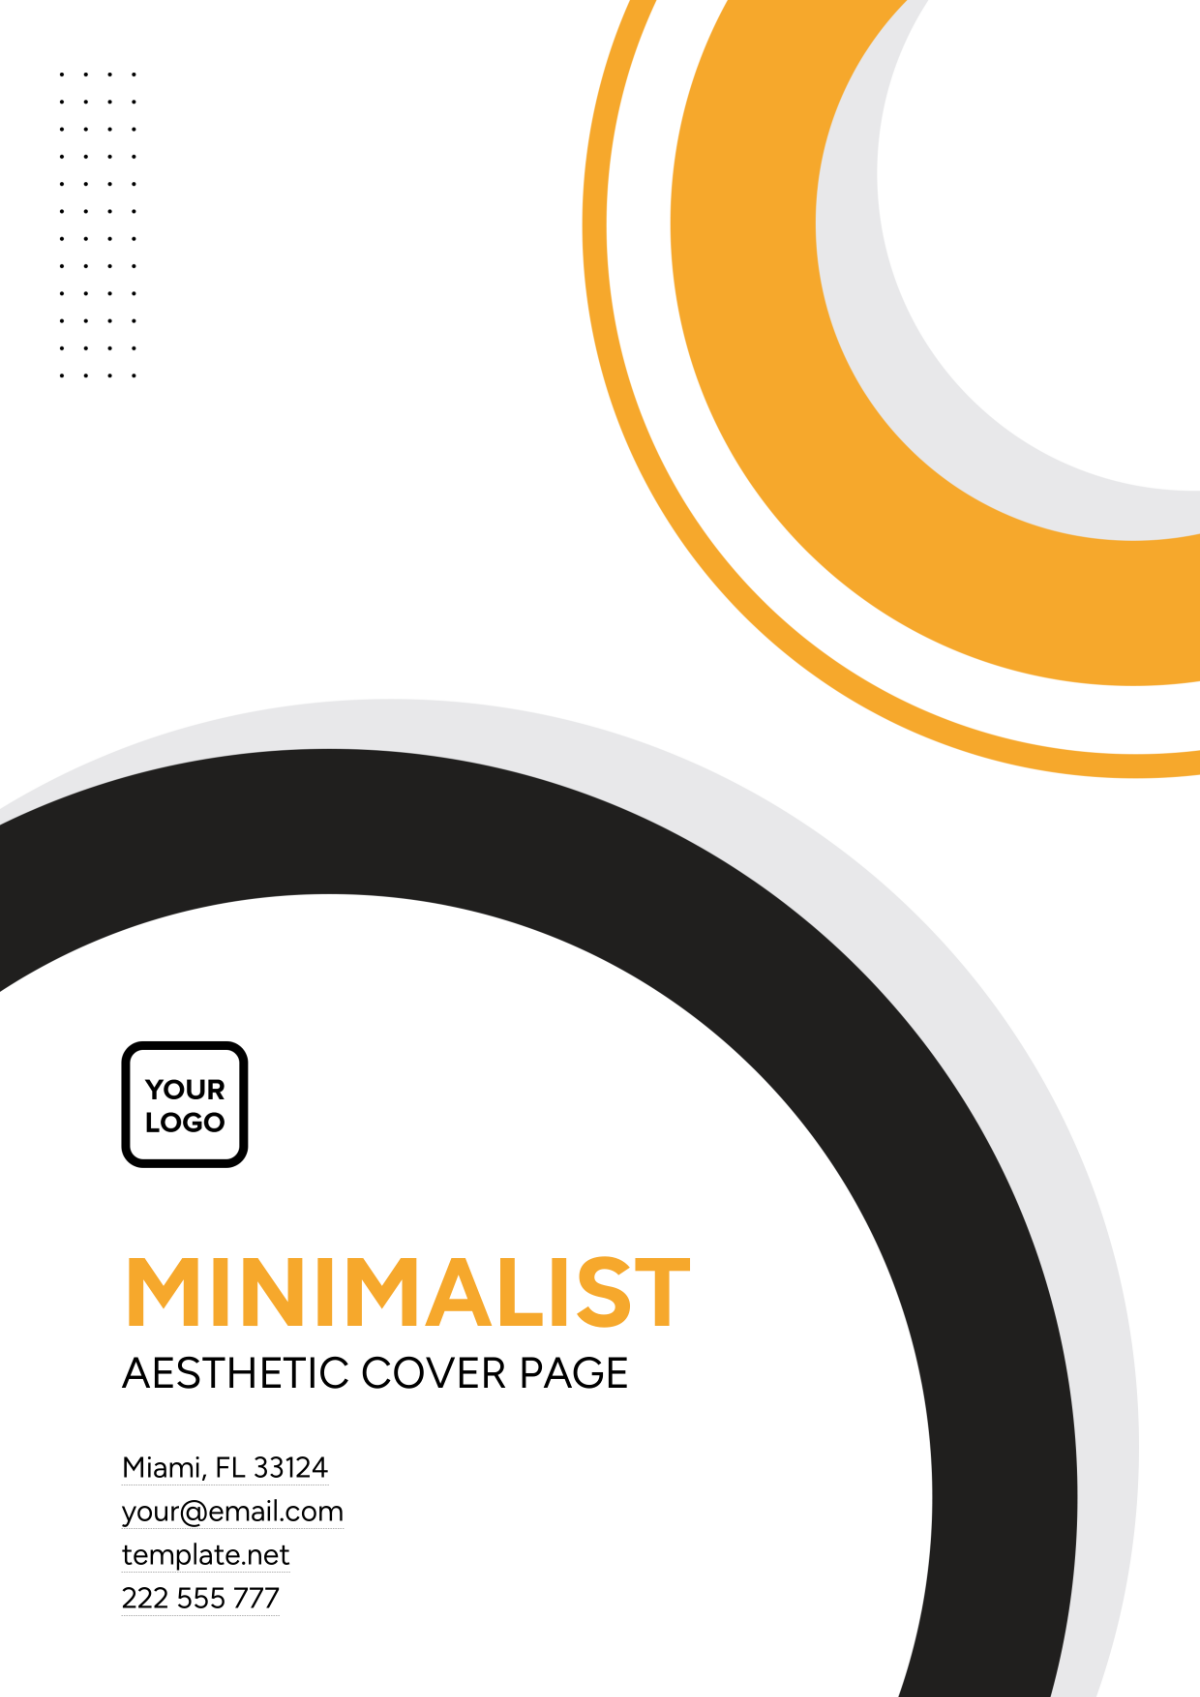 Minimalist Aesthetic Cover Page Template